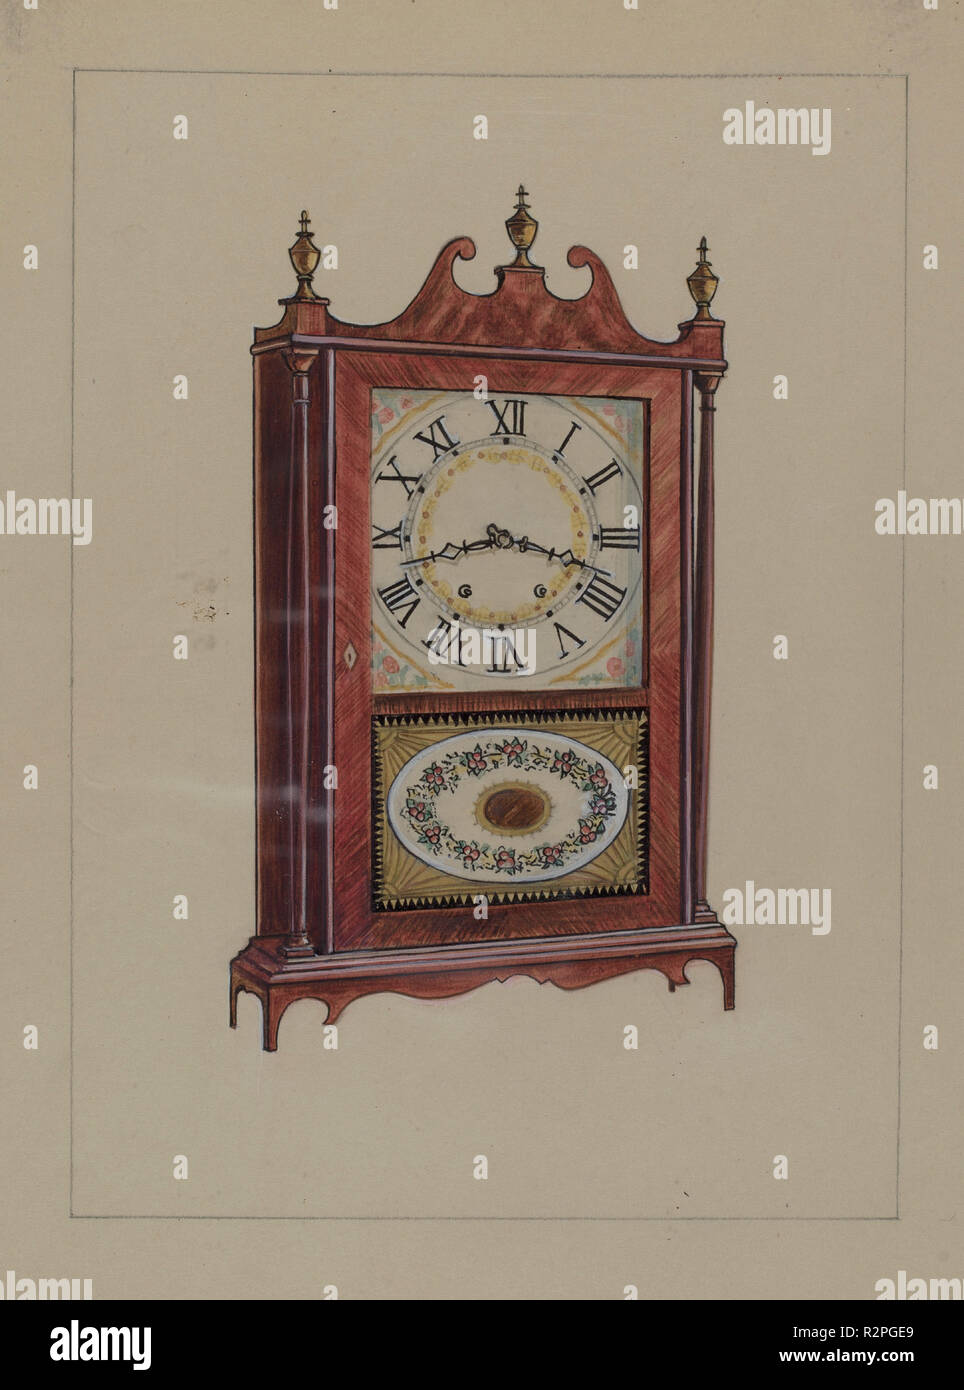 Shelf Clock. Dated: 1935/1942. Dimensions: overall: 29.3 x 22.2 cm (11 9/16 x 8 3/4 in.). Medium: watercolor, graphite, and gouache on paperboard. Museum: National Gallery of Art, Washington DC. Author: American 20th Century. Stock Photo